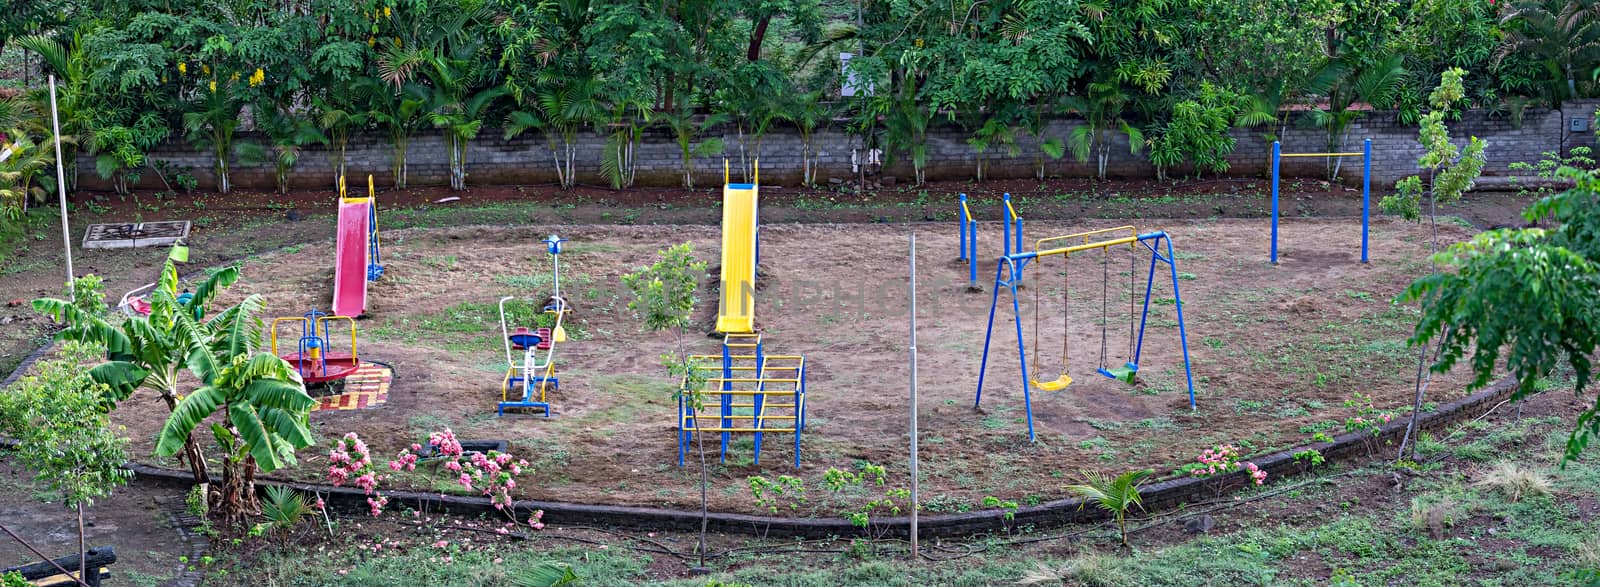 Empty children play park due to pandemic covid-19, corona virus outbreak by lalam